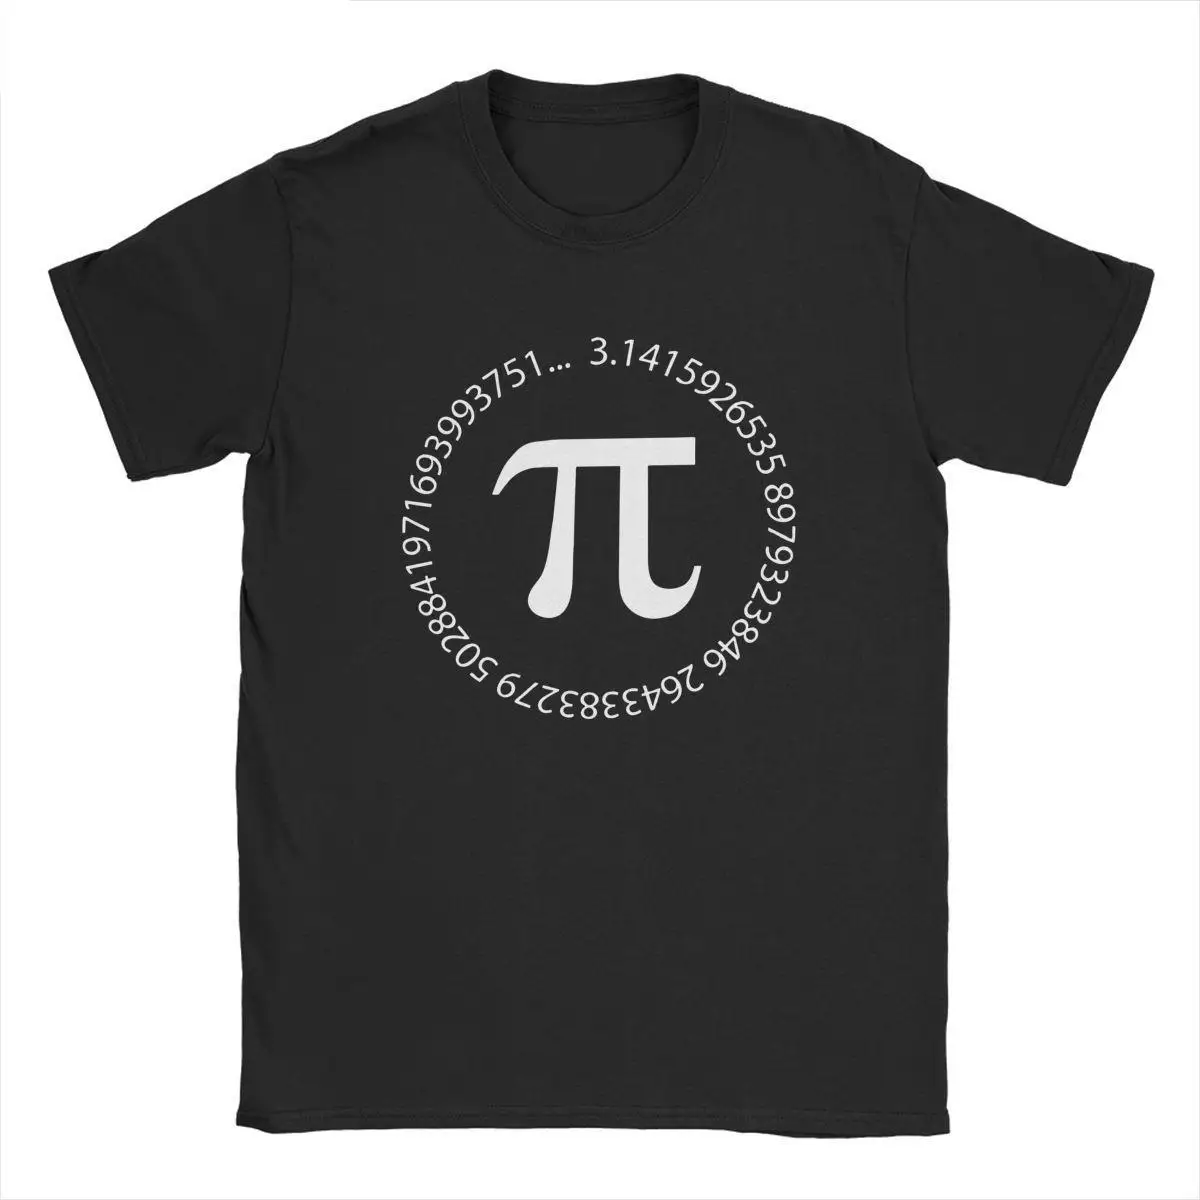 Men's T-Shirt Pi Sign Number Math Funny 100% Cotton Tees Short Sleeve T Shirts Round Neck Clothes Gift Idea